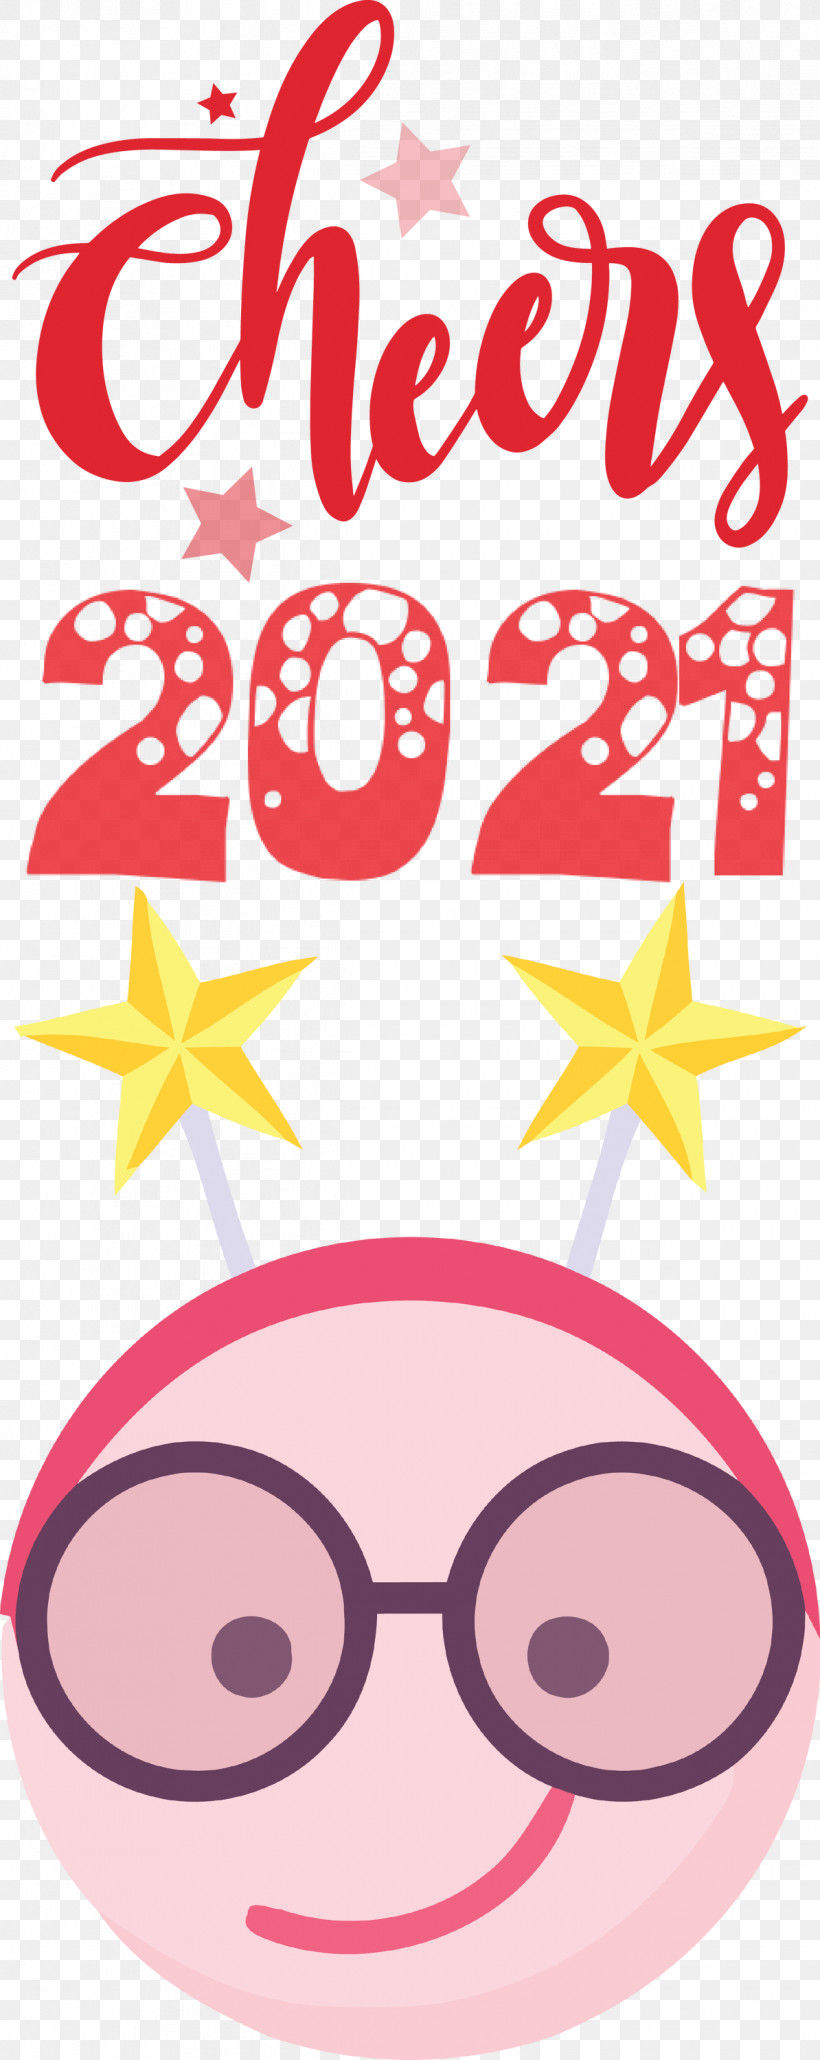 Cheers 2021 New Year Cheers.2021 New Year, PNG, 1194x3000px, Cheers 2021 New Year, Cartoon, Emoticon, Geometry, Happiness Download Free